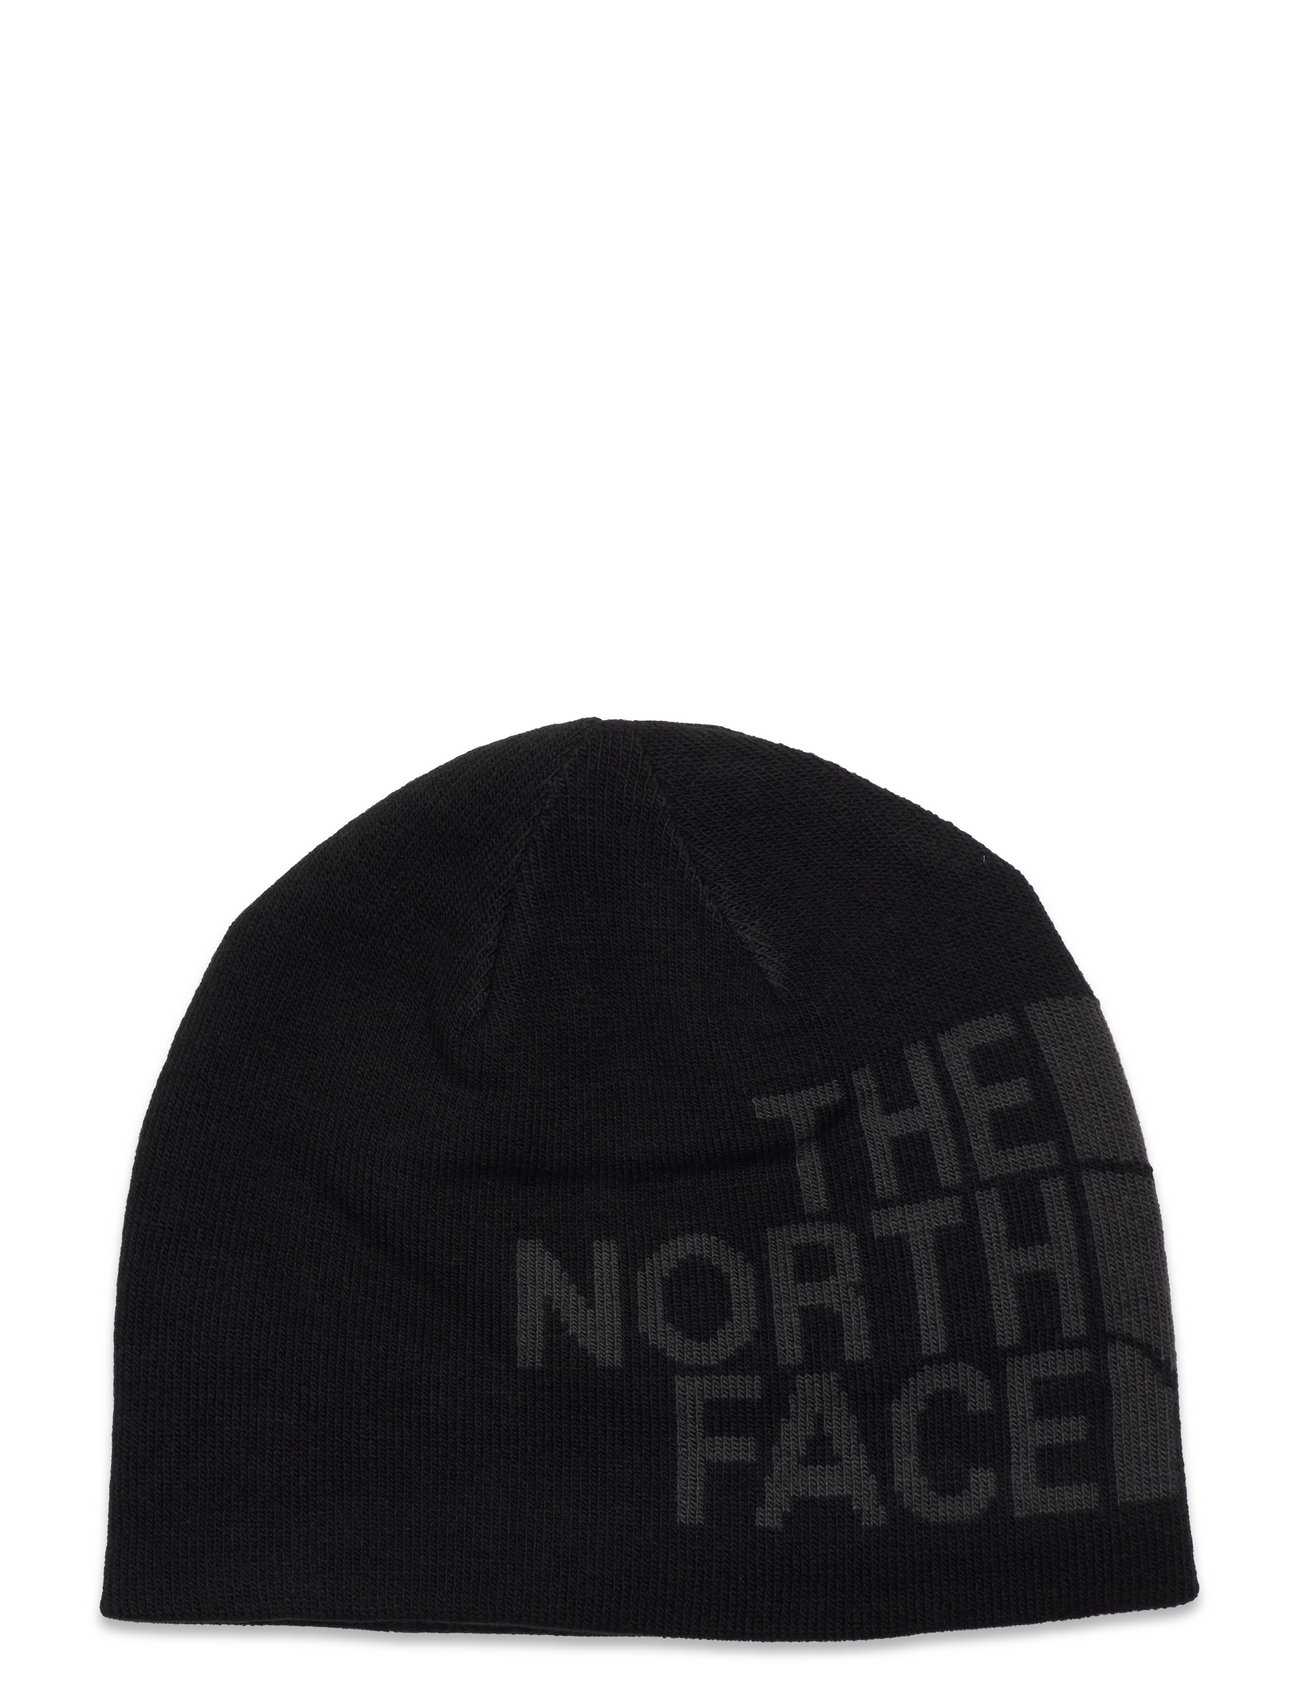 The North Face Rvsbl Tnf Banner Bne - Hats